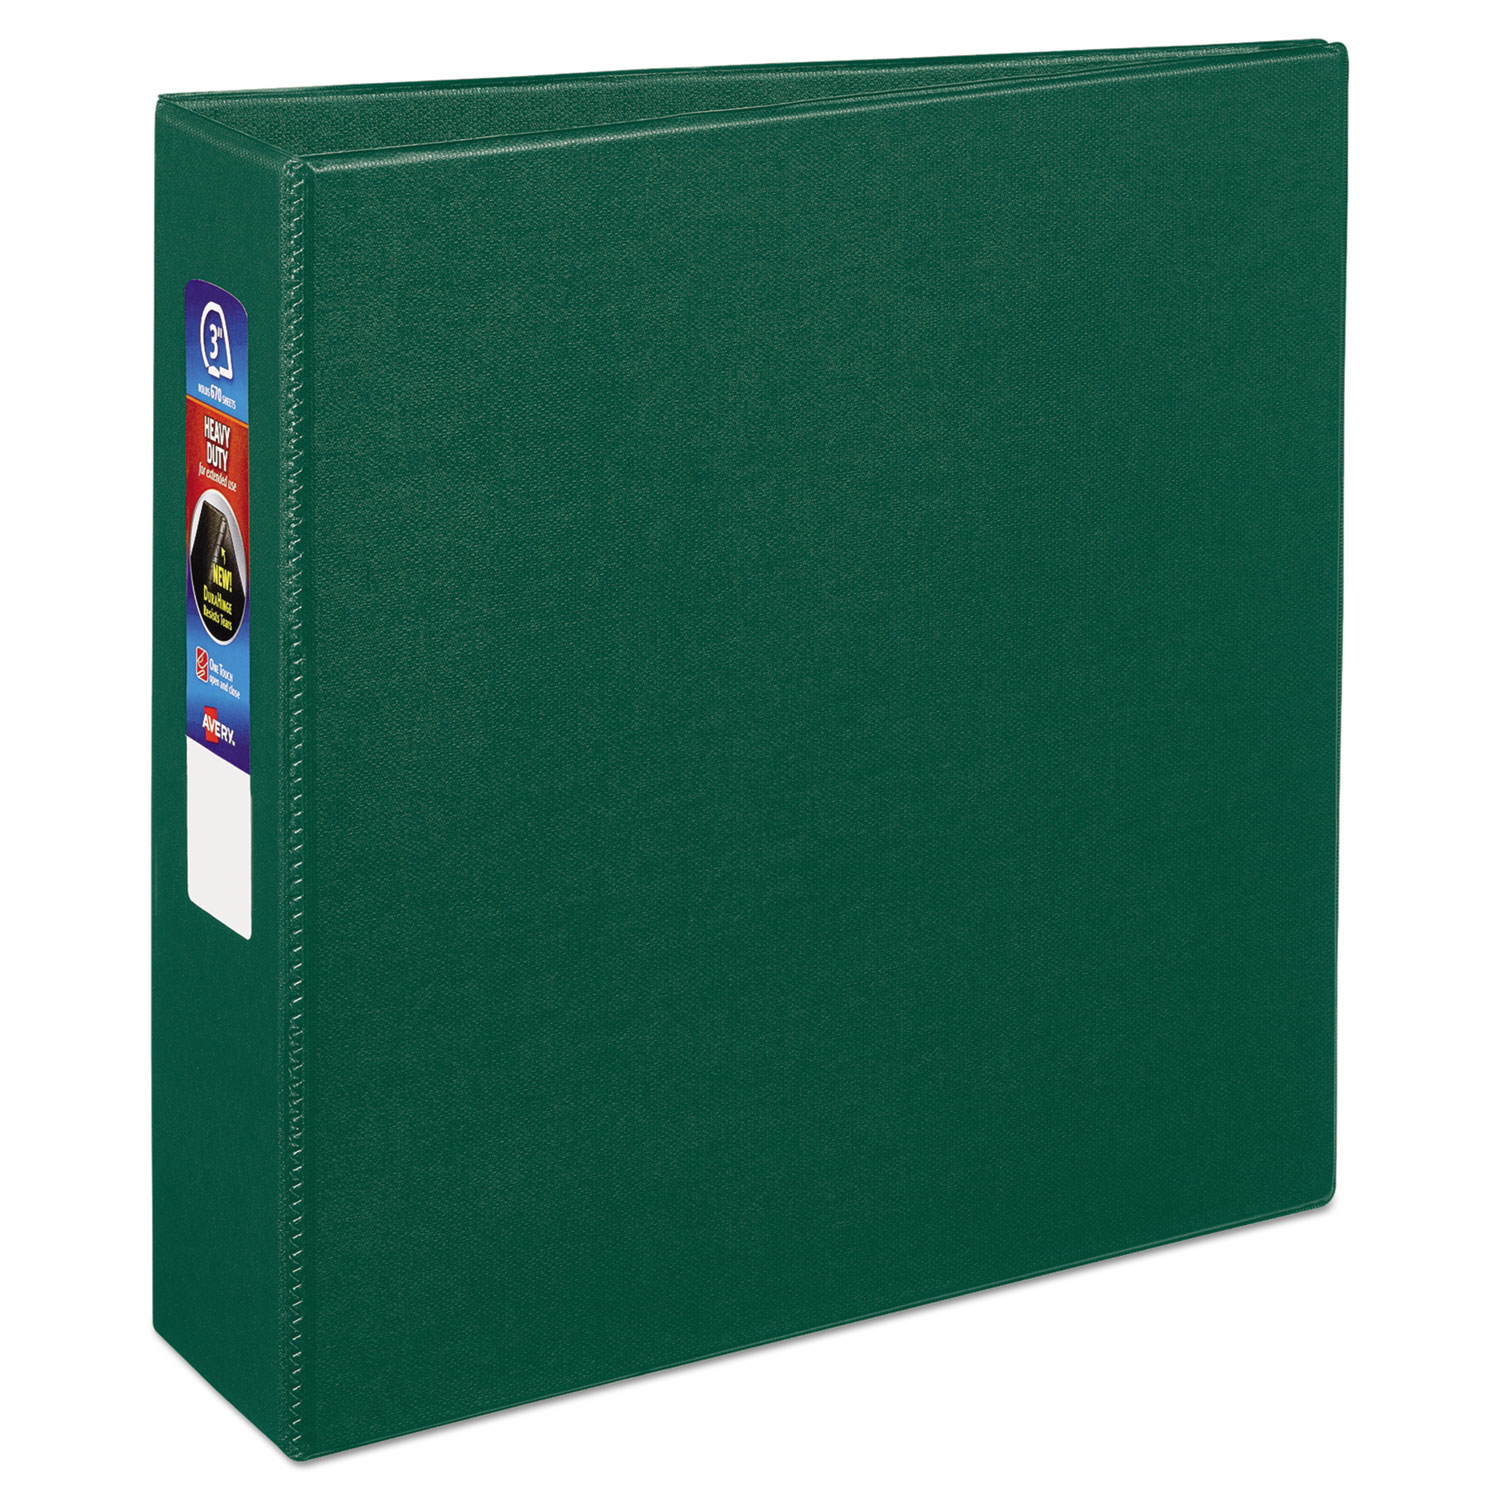  Avery 79783 Heavy-Duty Non-View Binder with DuraHinge and Locking One Touch EZD Rings, 3 Rings, 3 Capacity, 11 x 8.5, Green (AVE79783) 